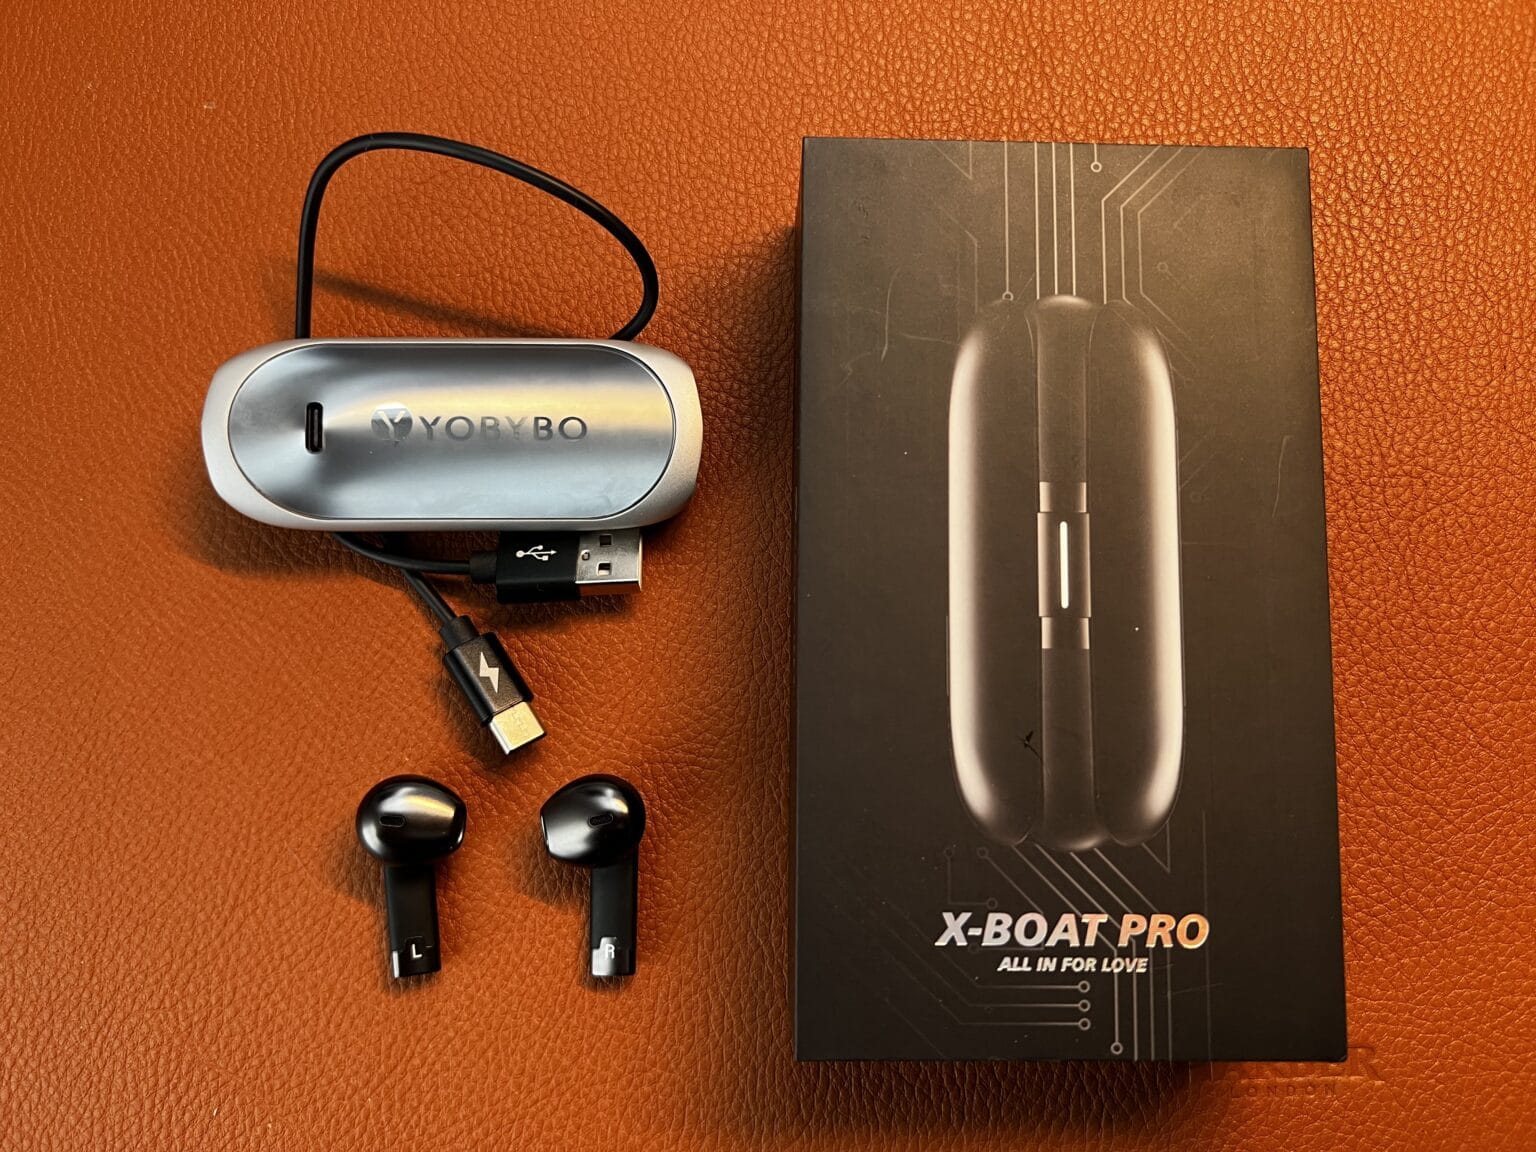 The Yobybo X-Boat Pro earbuds come with a USB cable and a sleek 